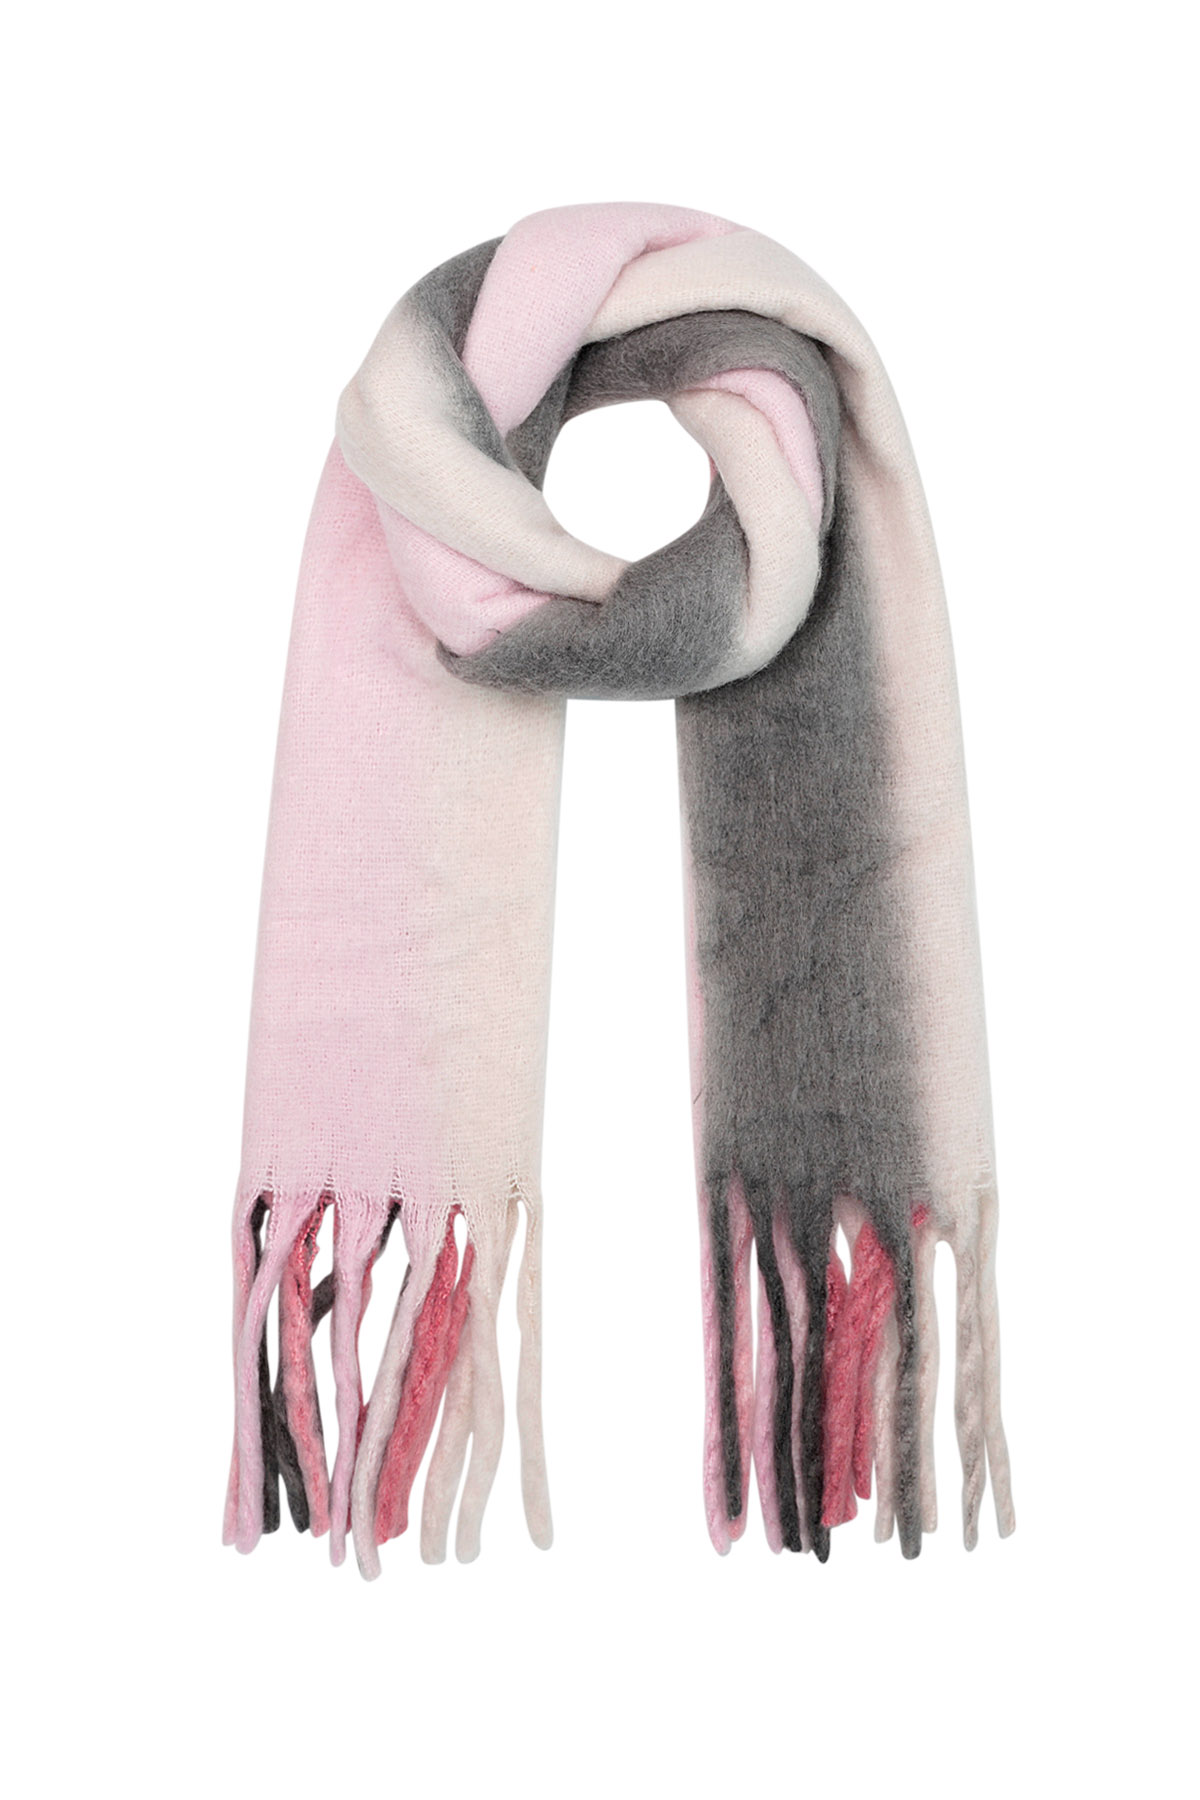 Winter scarf ombré colors pink/grey Polyester h5 